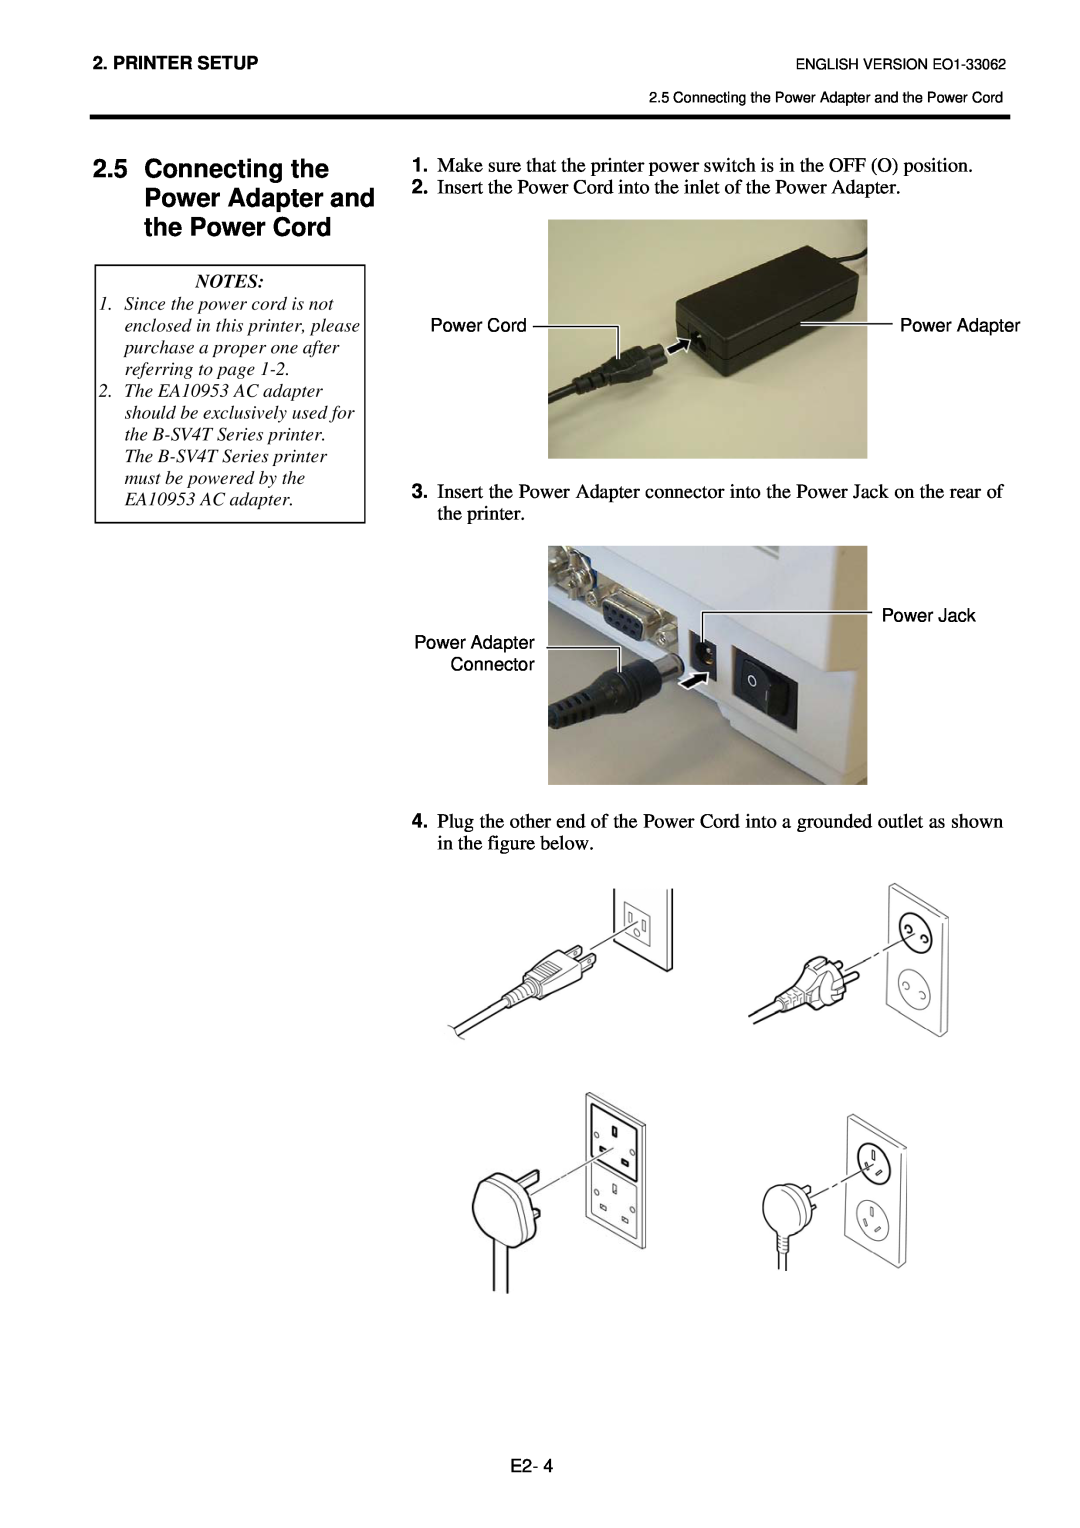 Toshiba B-SV4T owner manual Connecting the Power Adapter and the Power Cord 